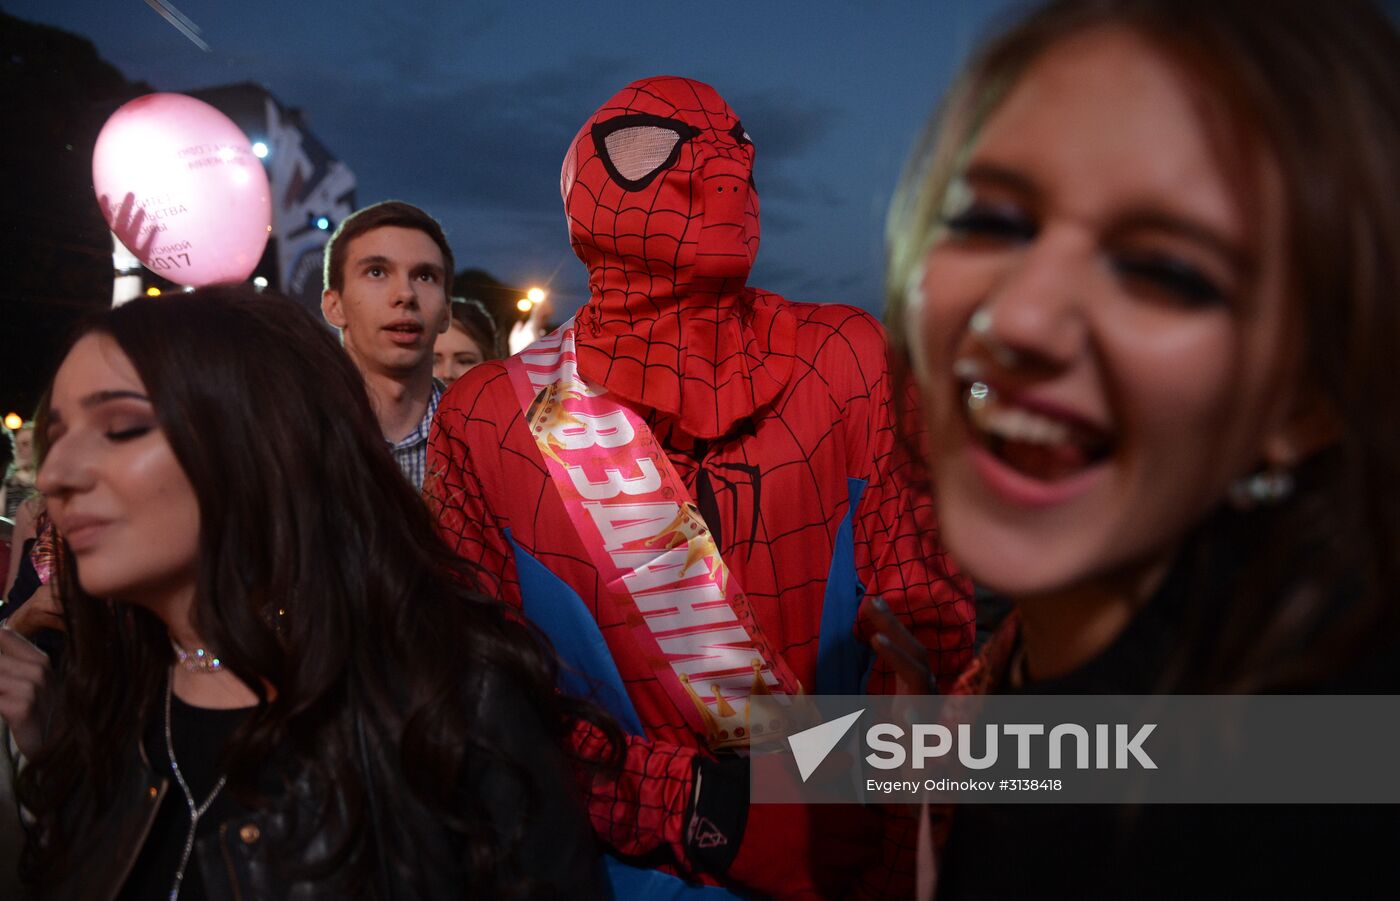 Moscow Prom in Gorky Park